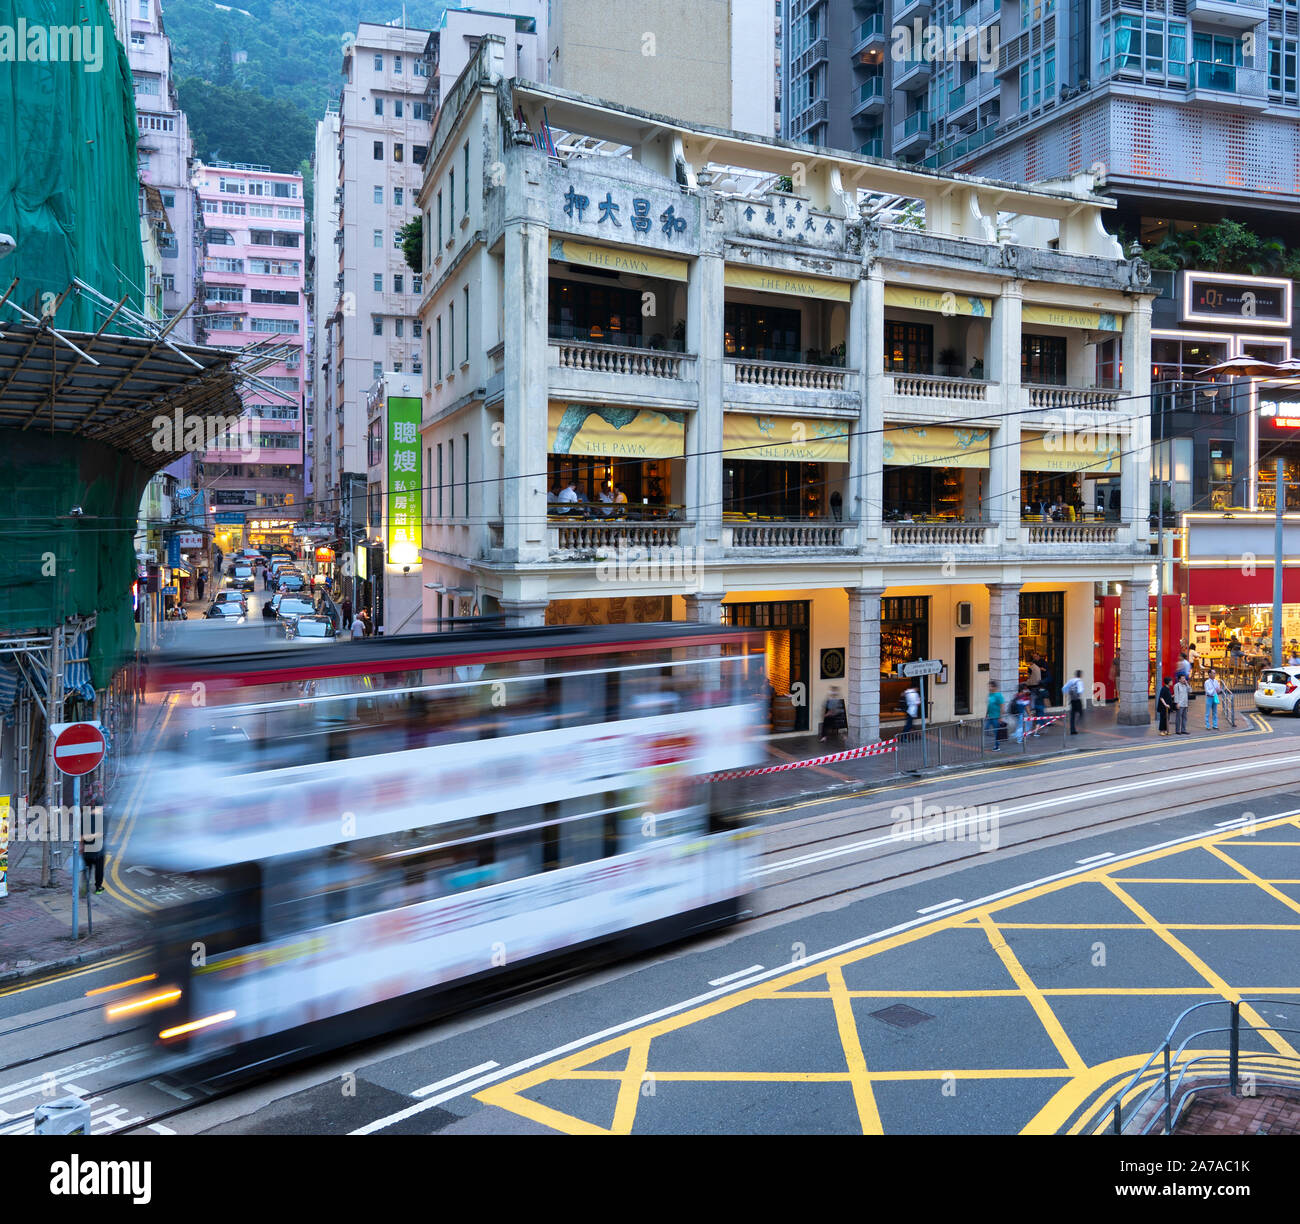 Tram passing old colonial building now restaurants and bar called The Pawn in Wanchai, Hong Kong Stock Photo